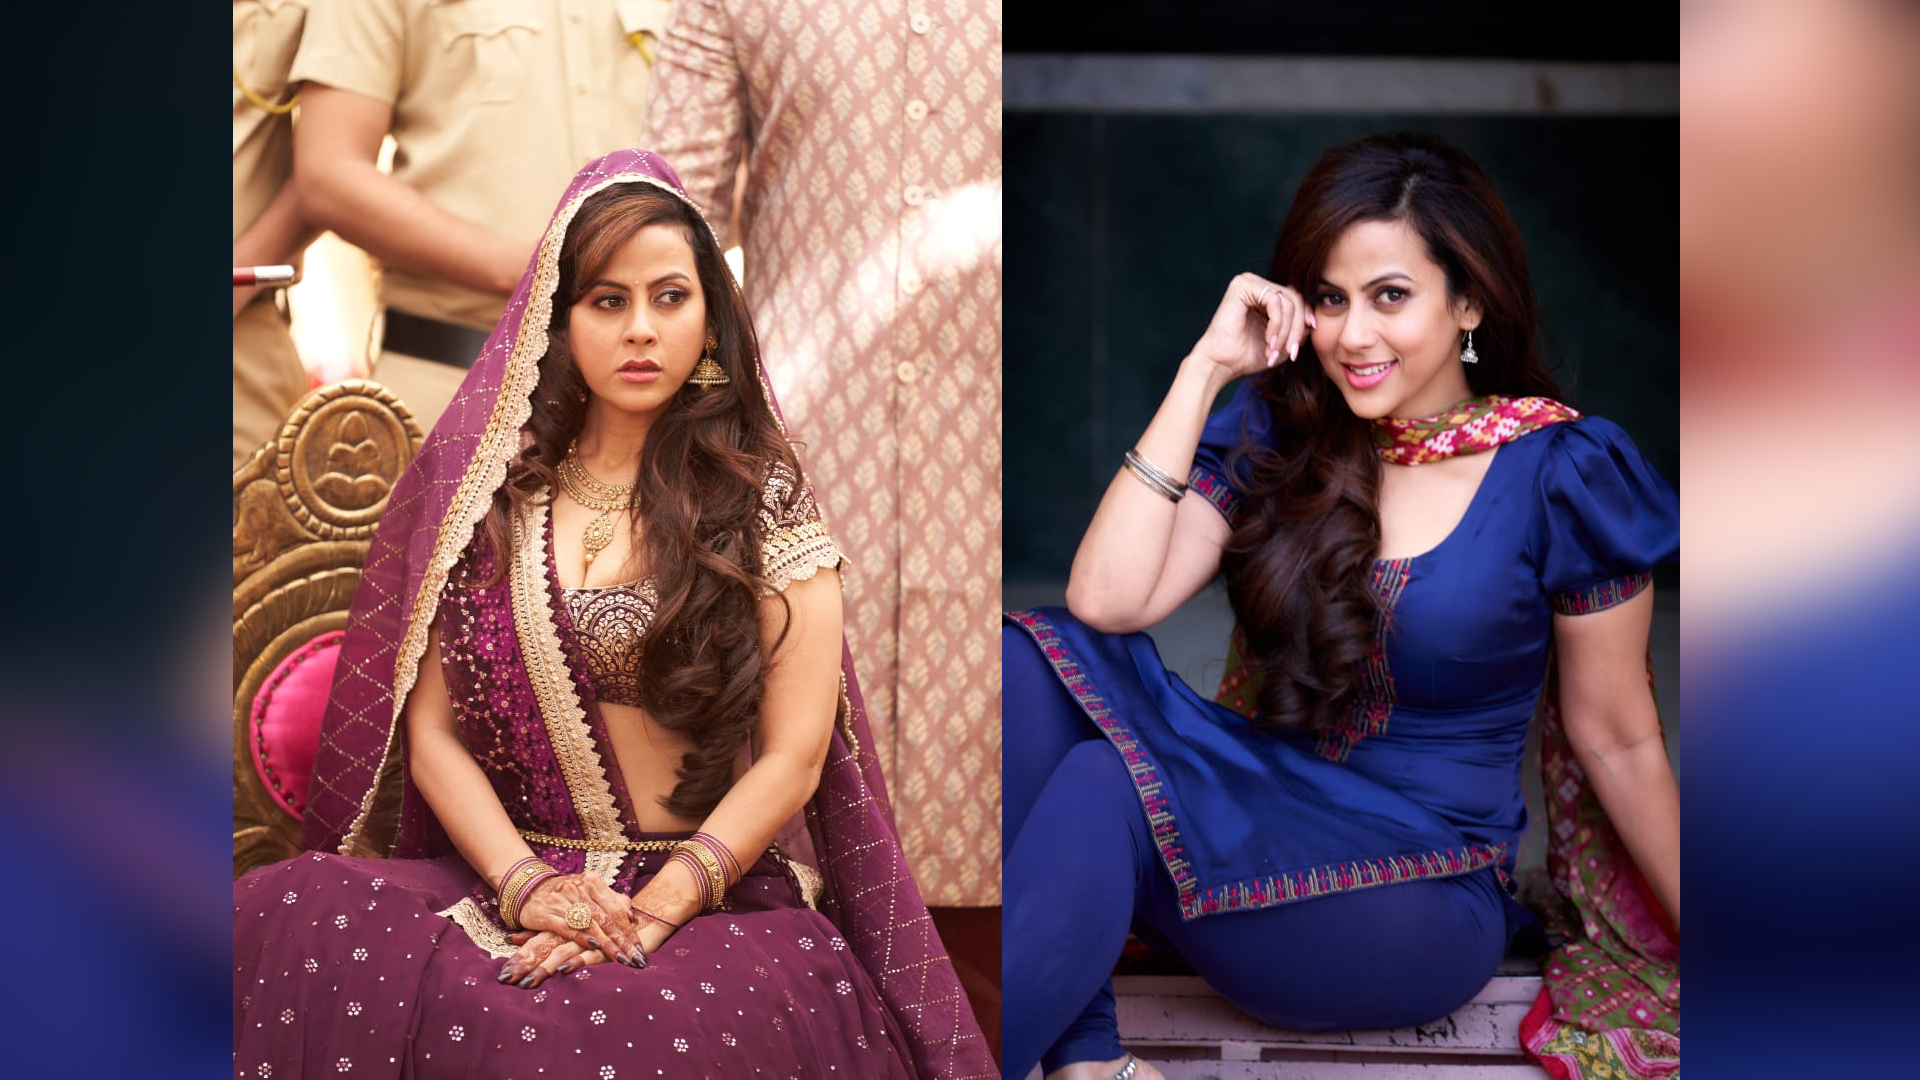 Who is the ‘Bewafa’ girl from ‘Bachchhan Paandey’s song ‘Saare Bolo Bewafa’ that grabbed audiences’ attention?